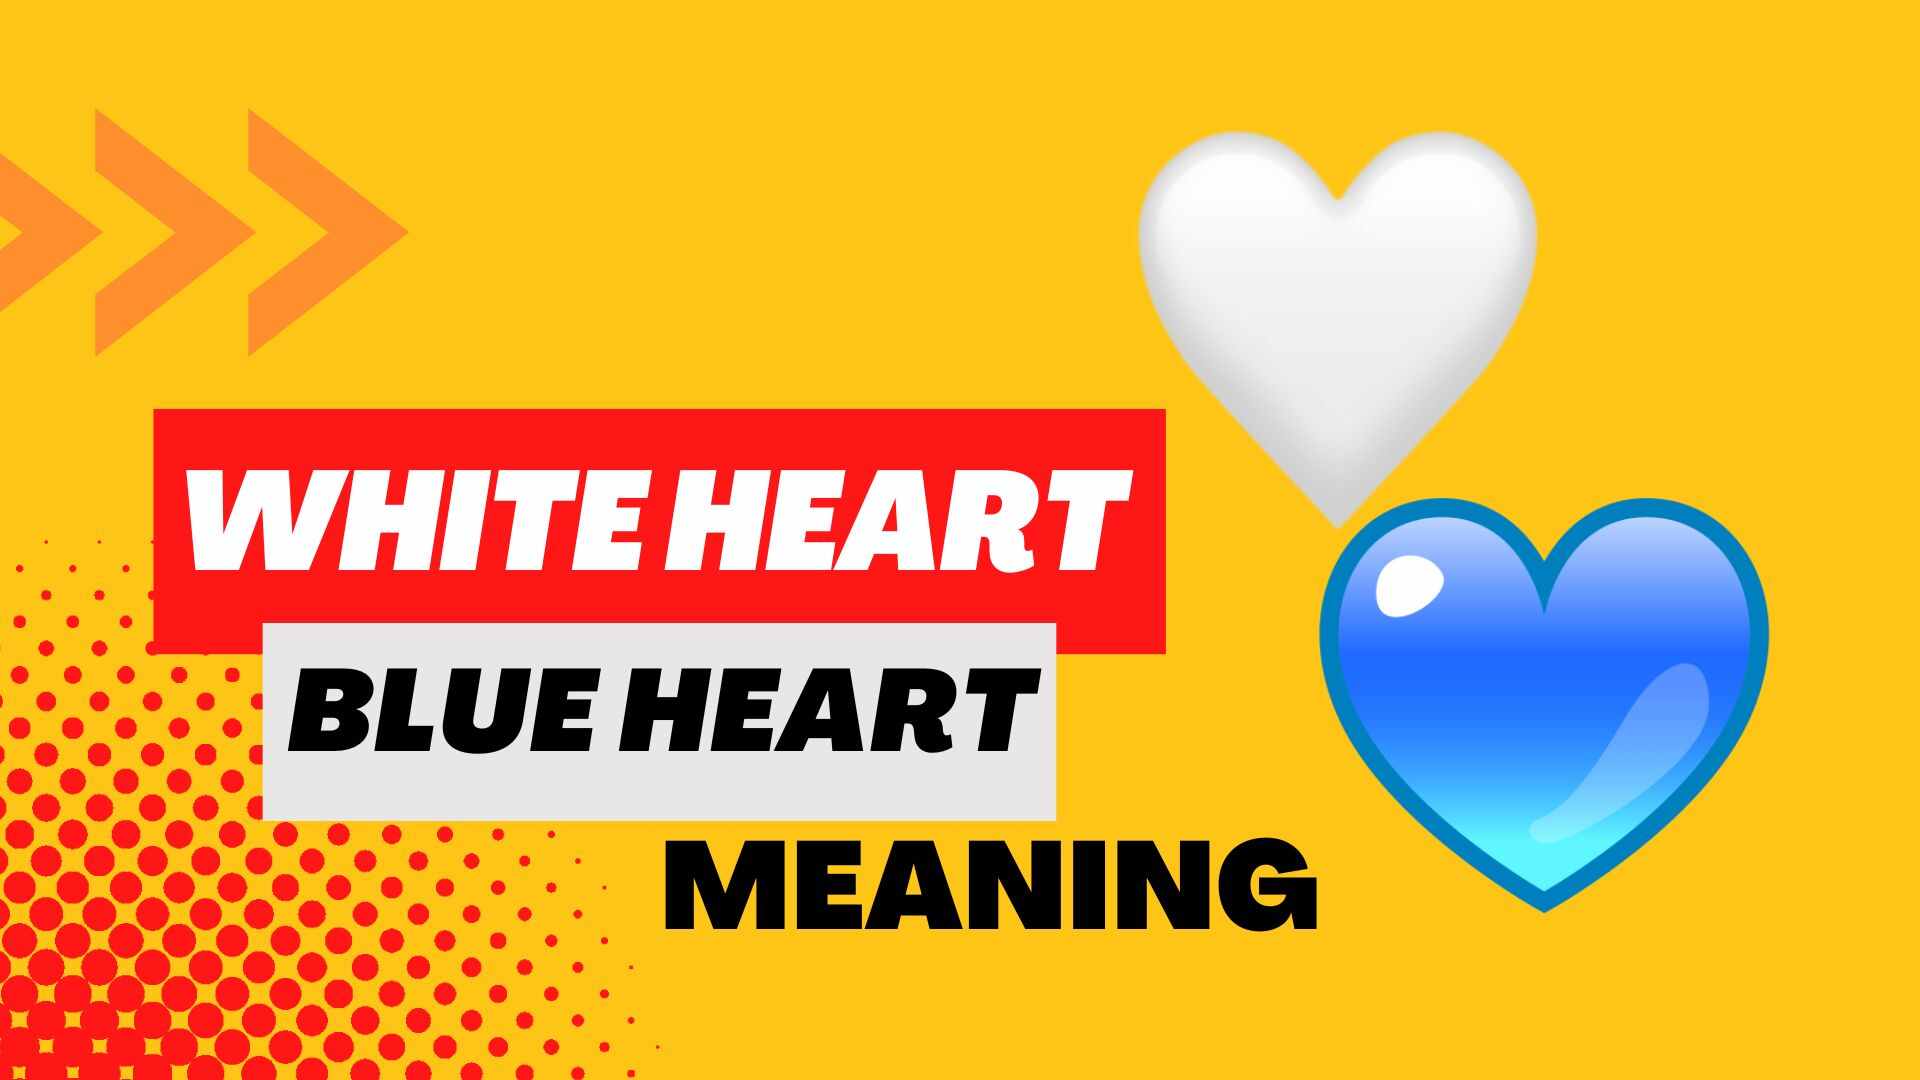 White heart Blue heart meaning